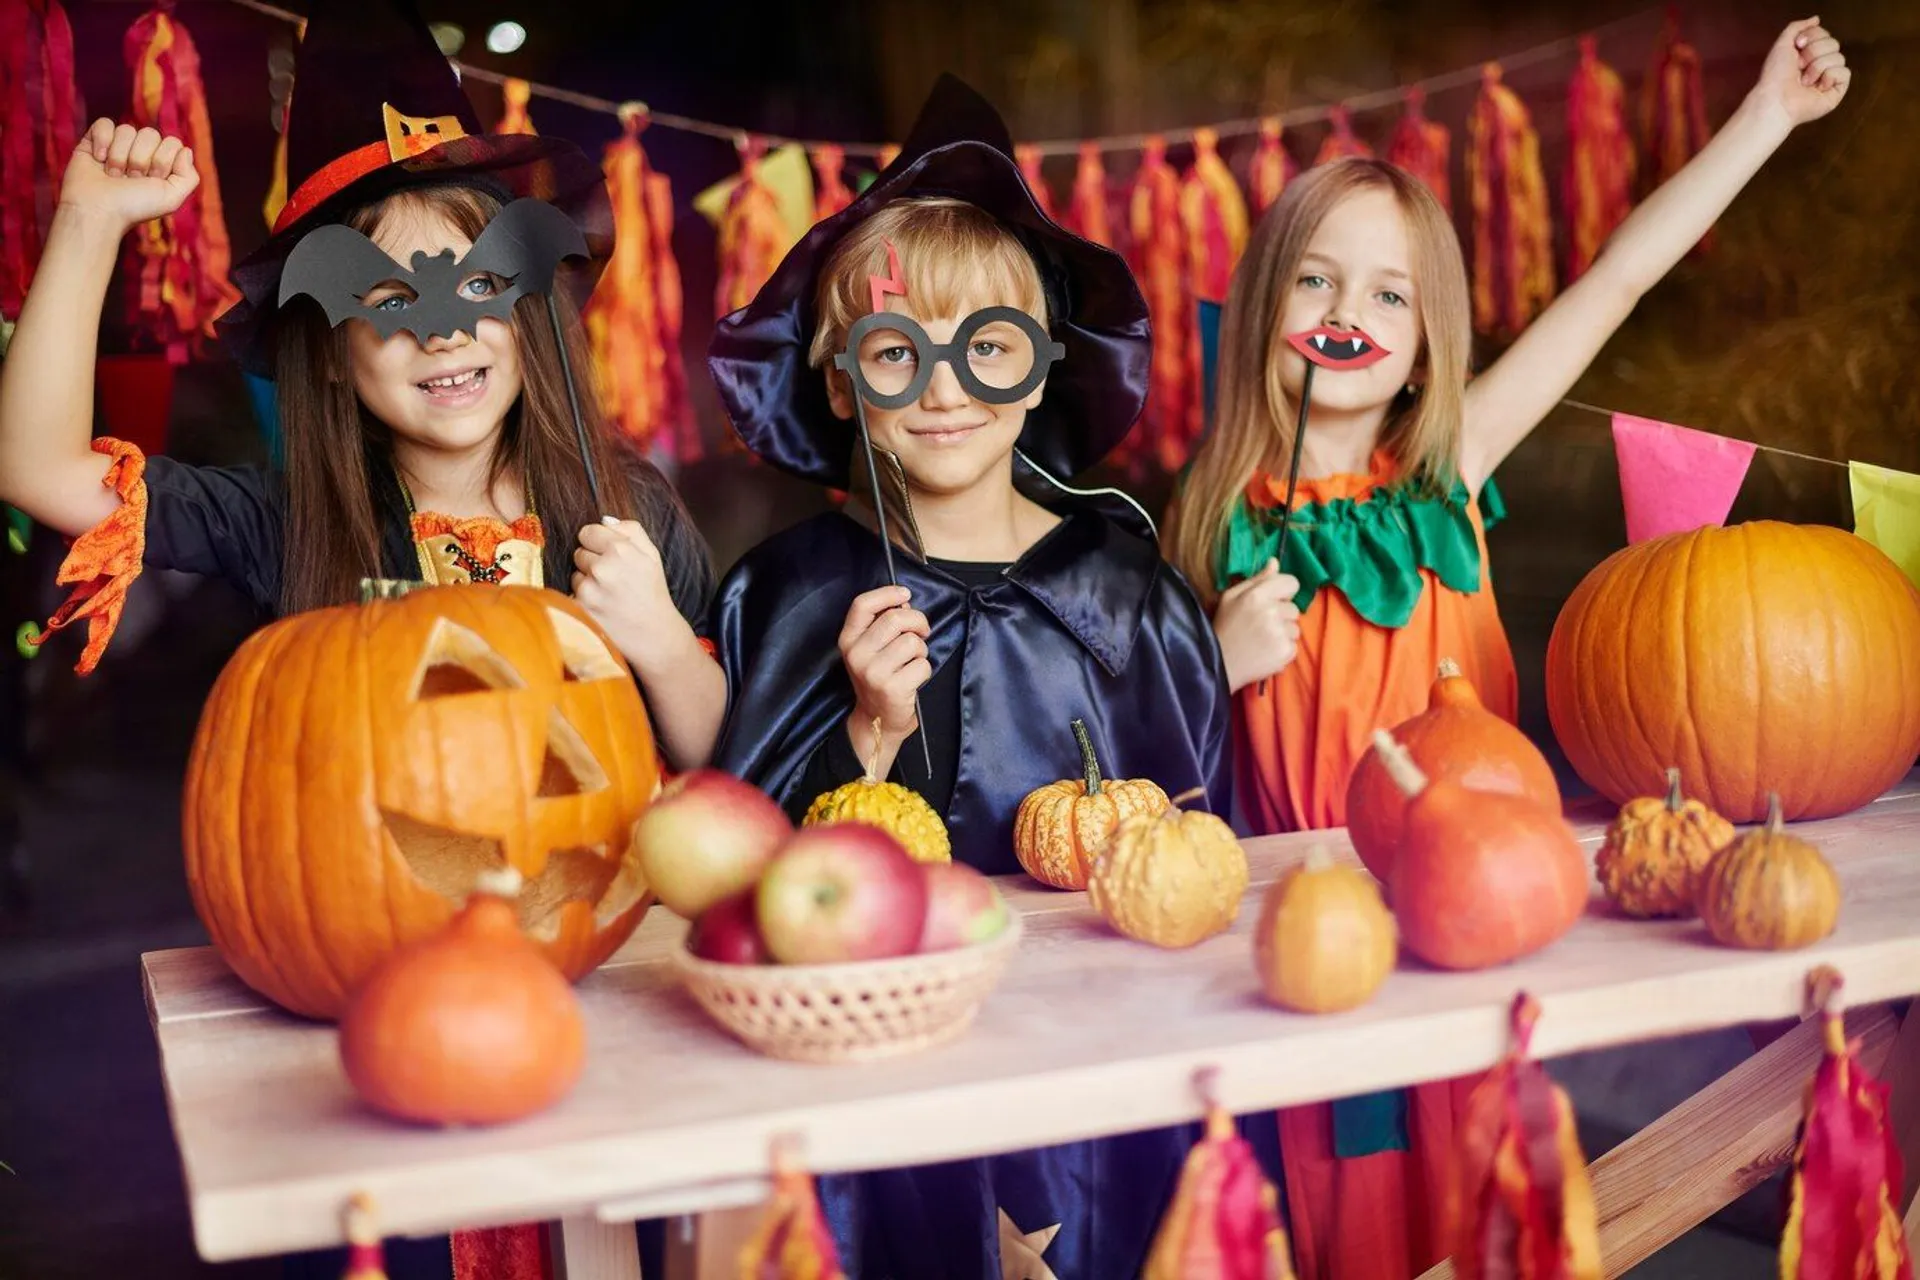 Halloween is here: save big on costumes, candy, and more!